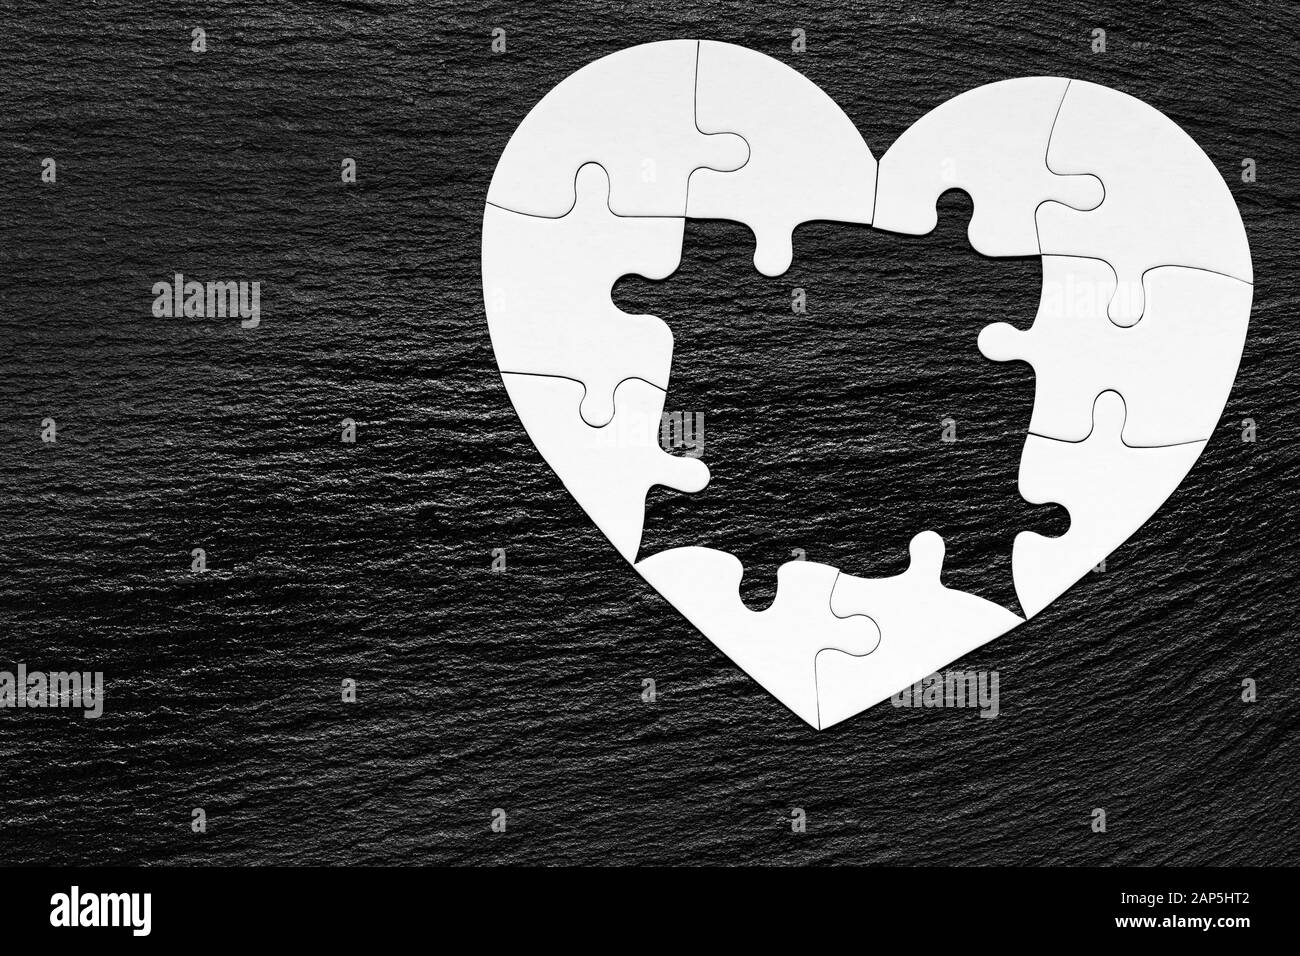 Heart puzzle Black and White Stock Photos & Images - Alamy